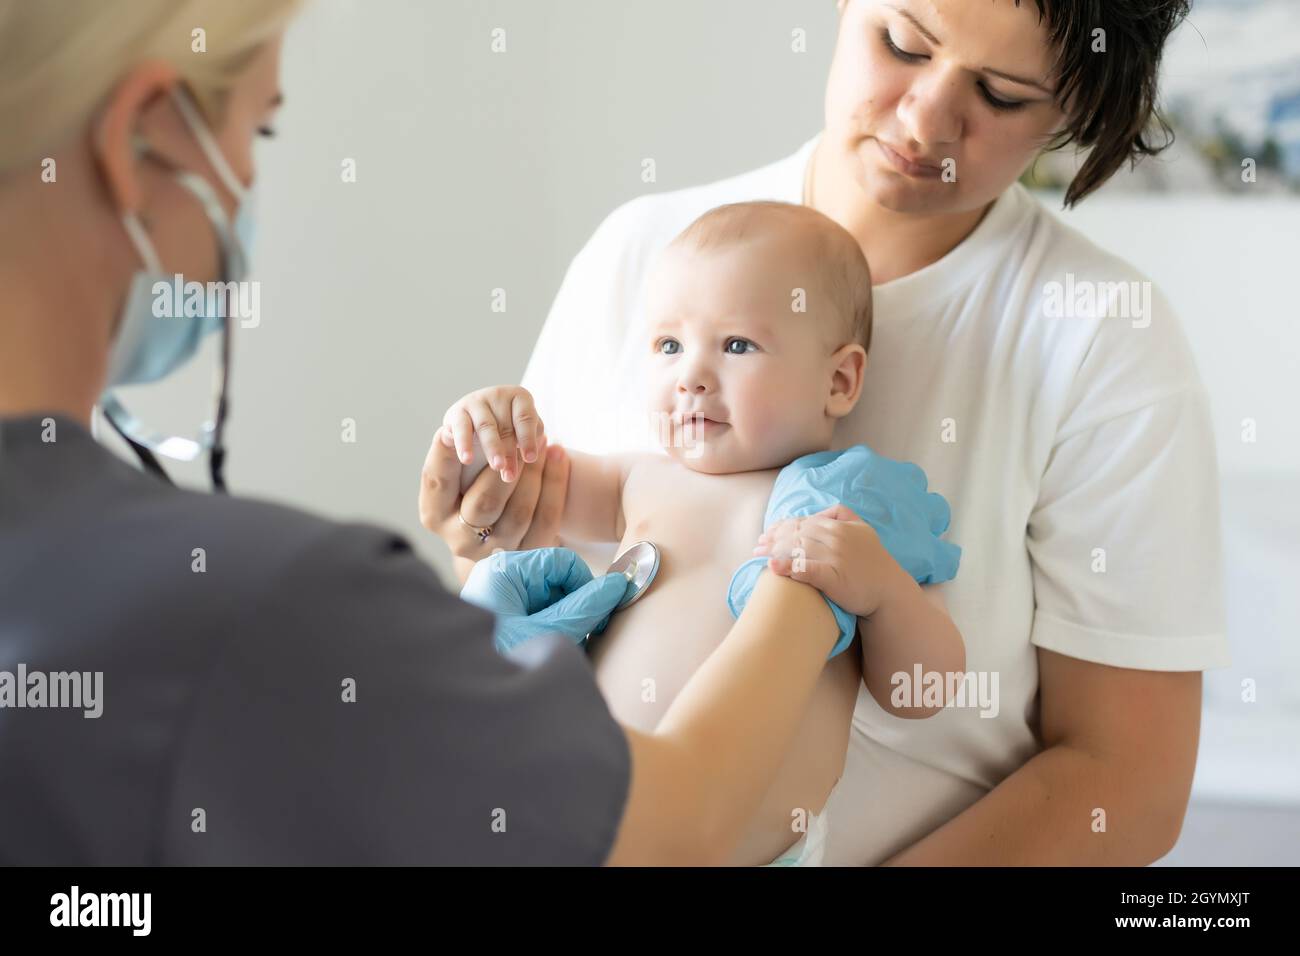 Female doctor examining little smiling baby girl, held by mother Stock Photo